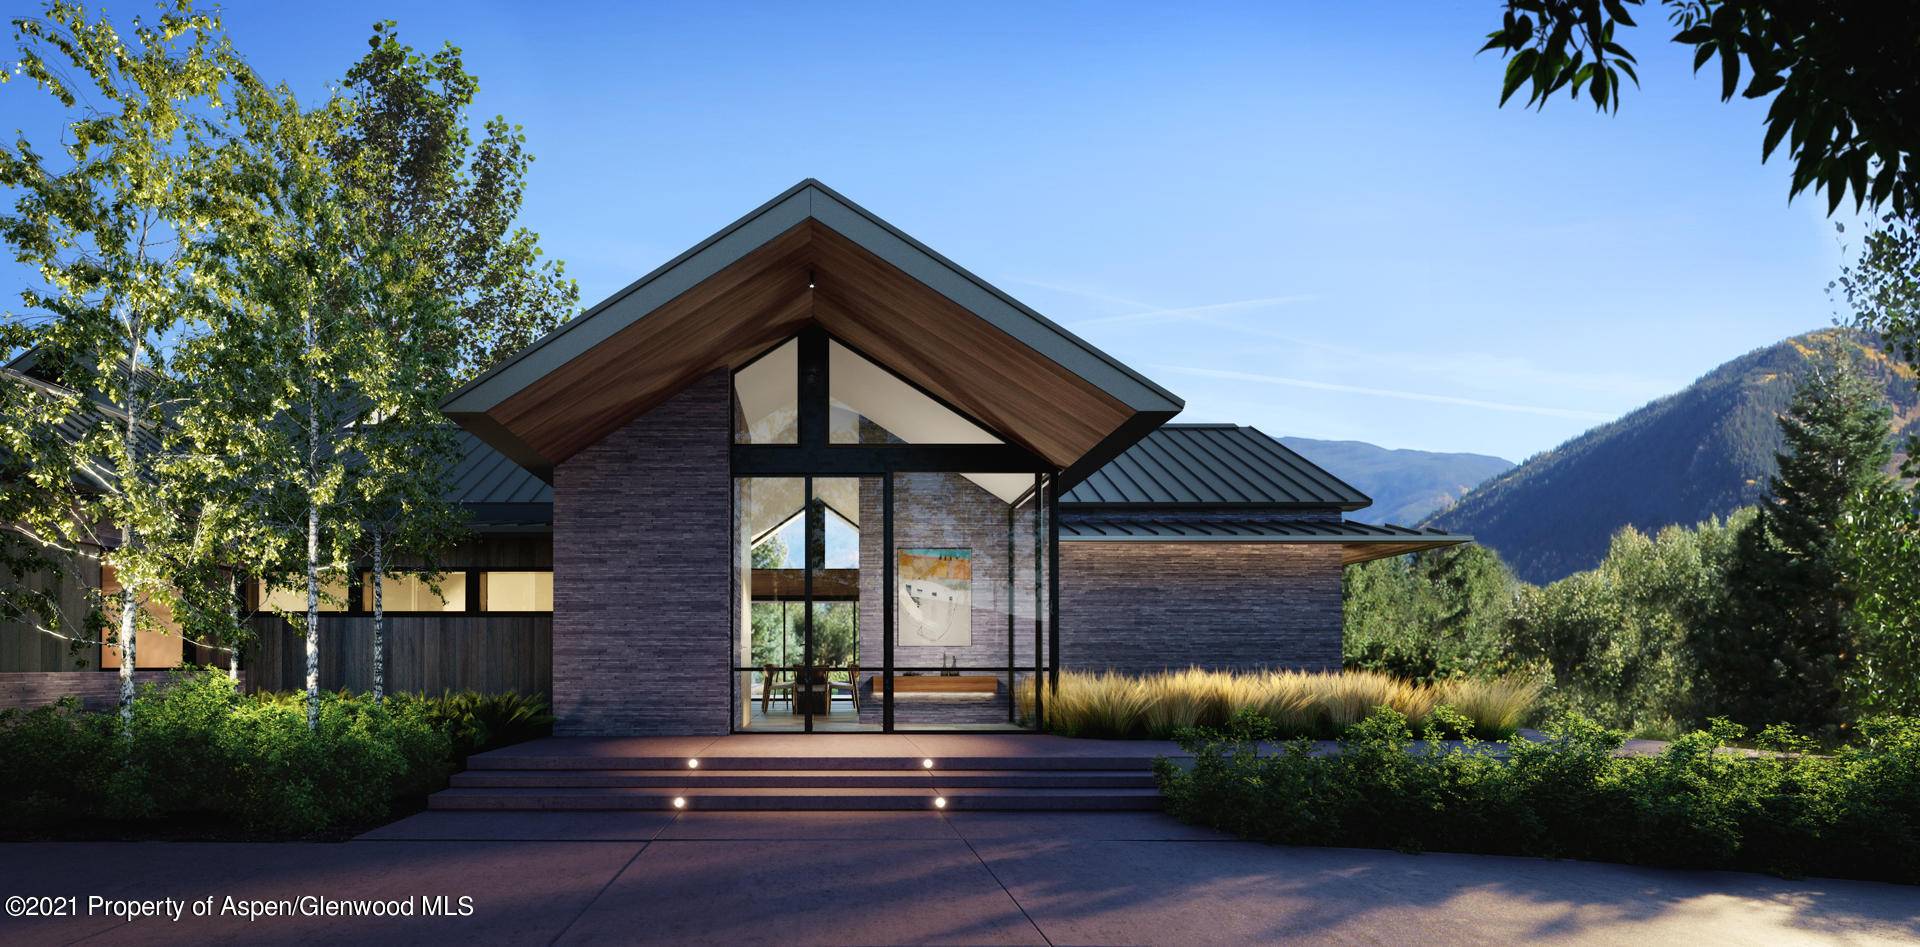 Developed by Good Property in collaboration with Gabellini Sheppard, Eigelberger Architects, Design Workshop and Henrybuilt, 1099 Willoughby Way is located on just over 1 acre at the end of Aspen's ...